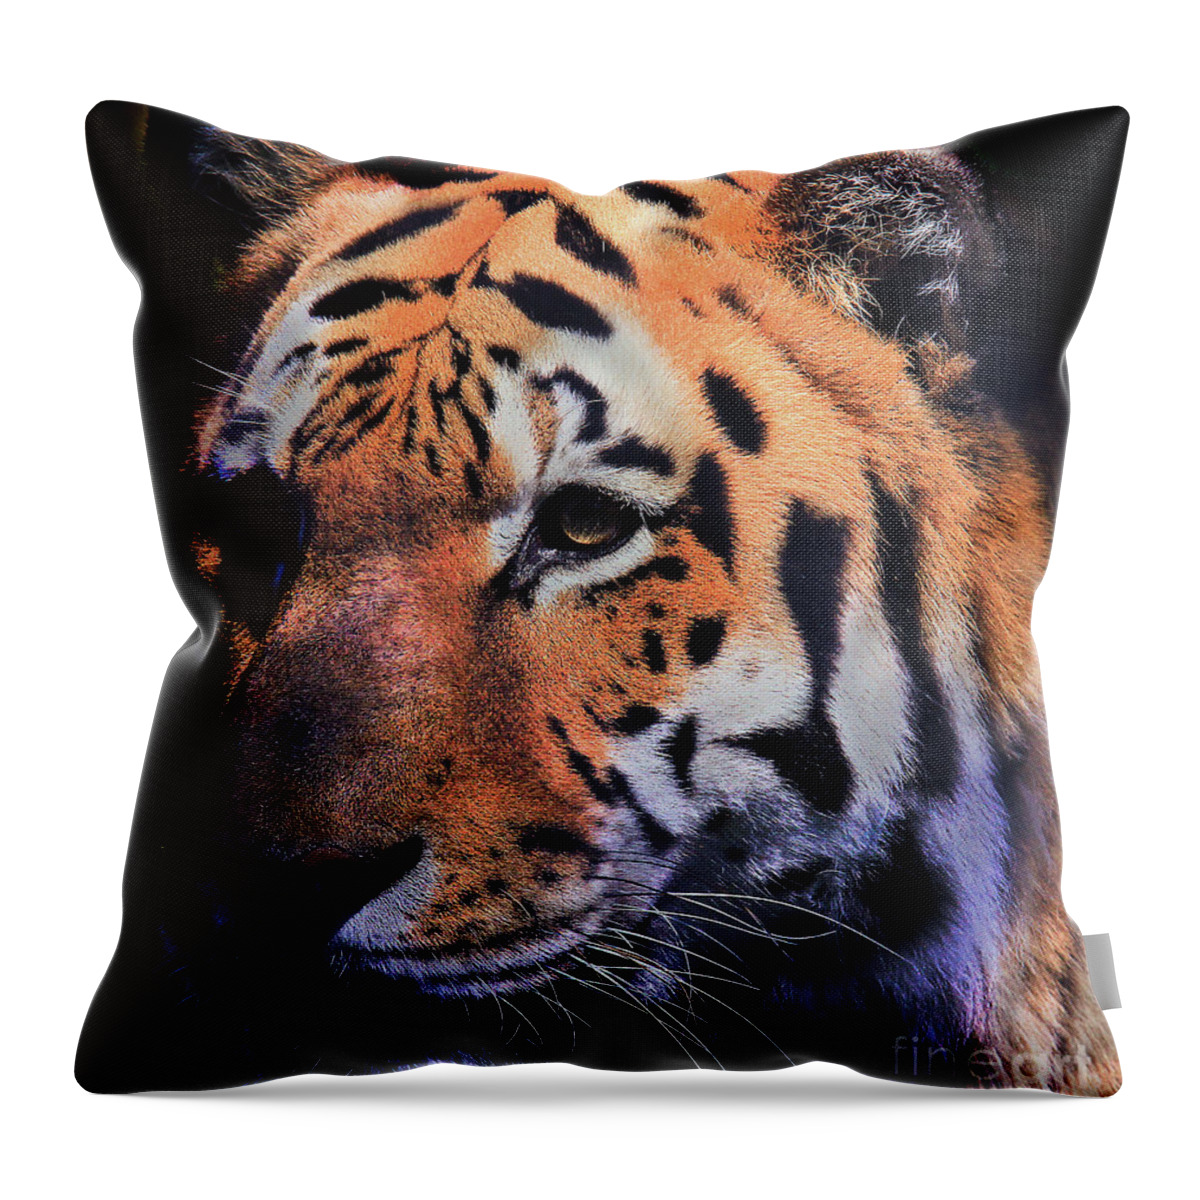 Tiger Throw Pillow featuring the photograph Tiger Portrait by Roger Becker